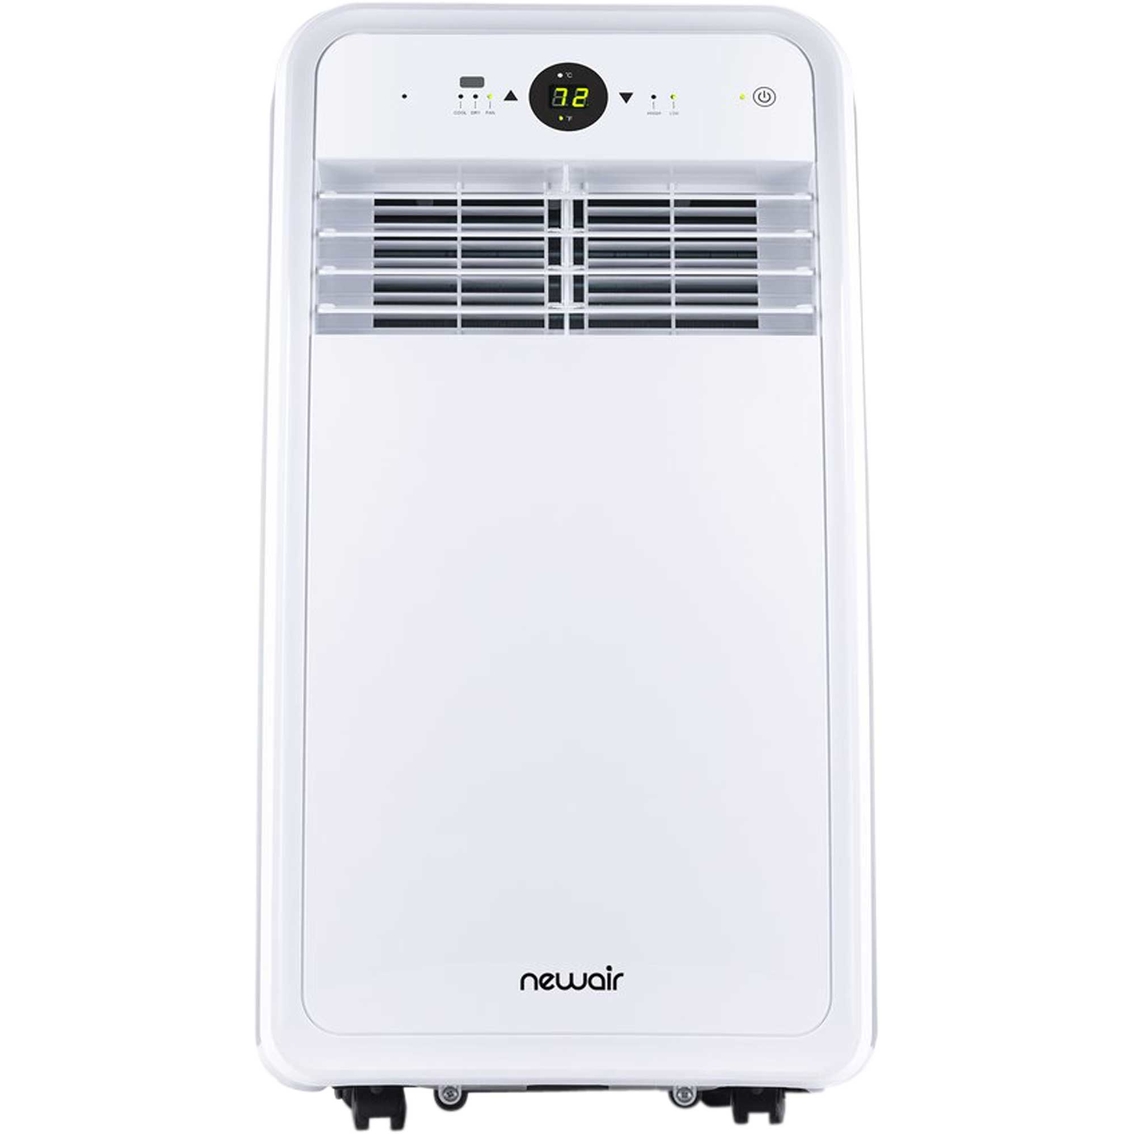 NewAir Compact 8,000 BTU Portable Air Conditioner - Image 2 of 10